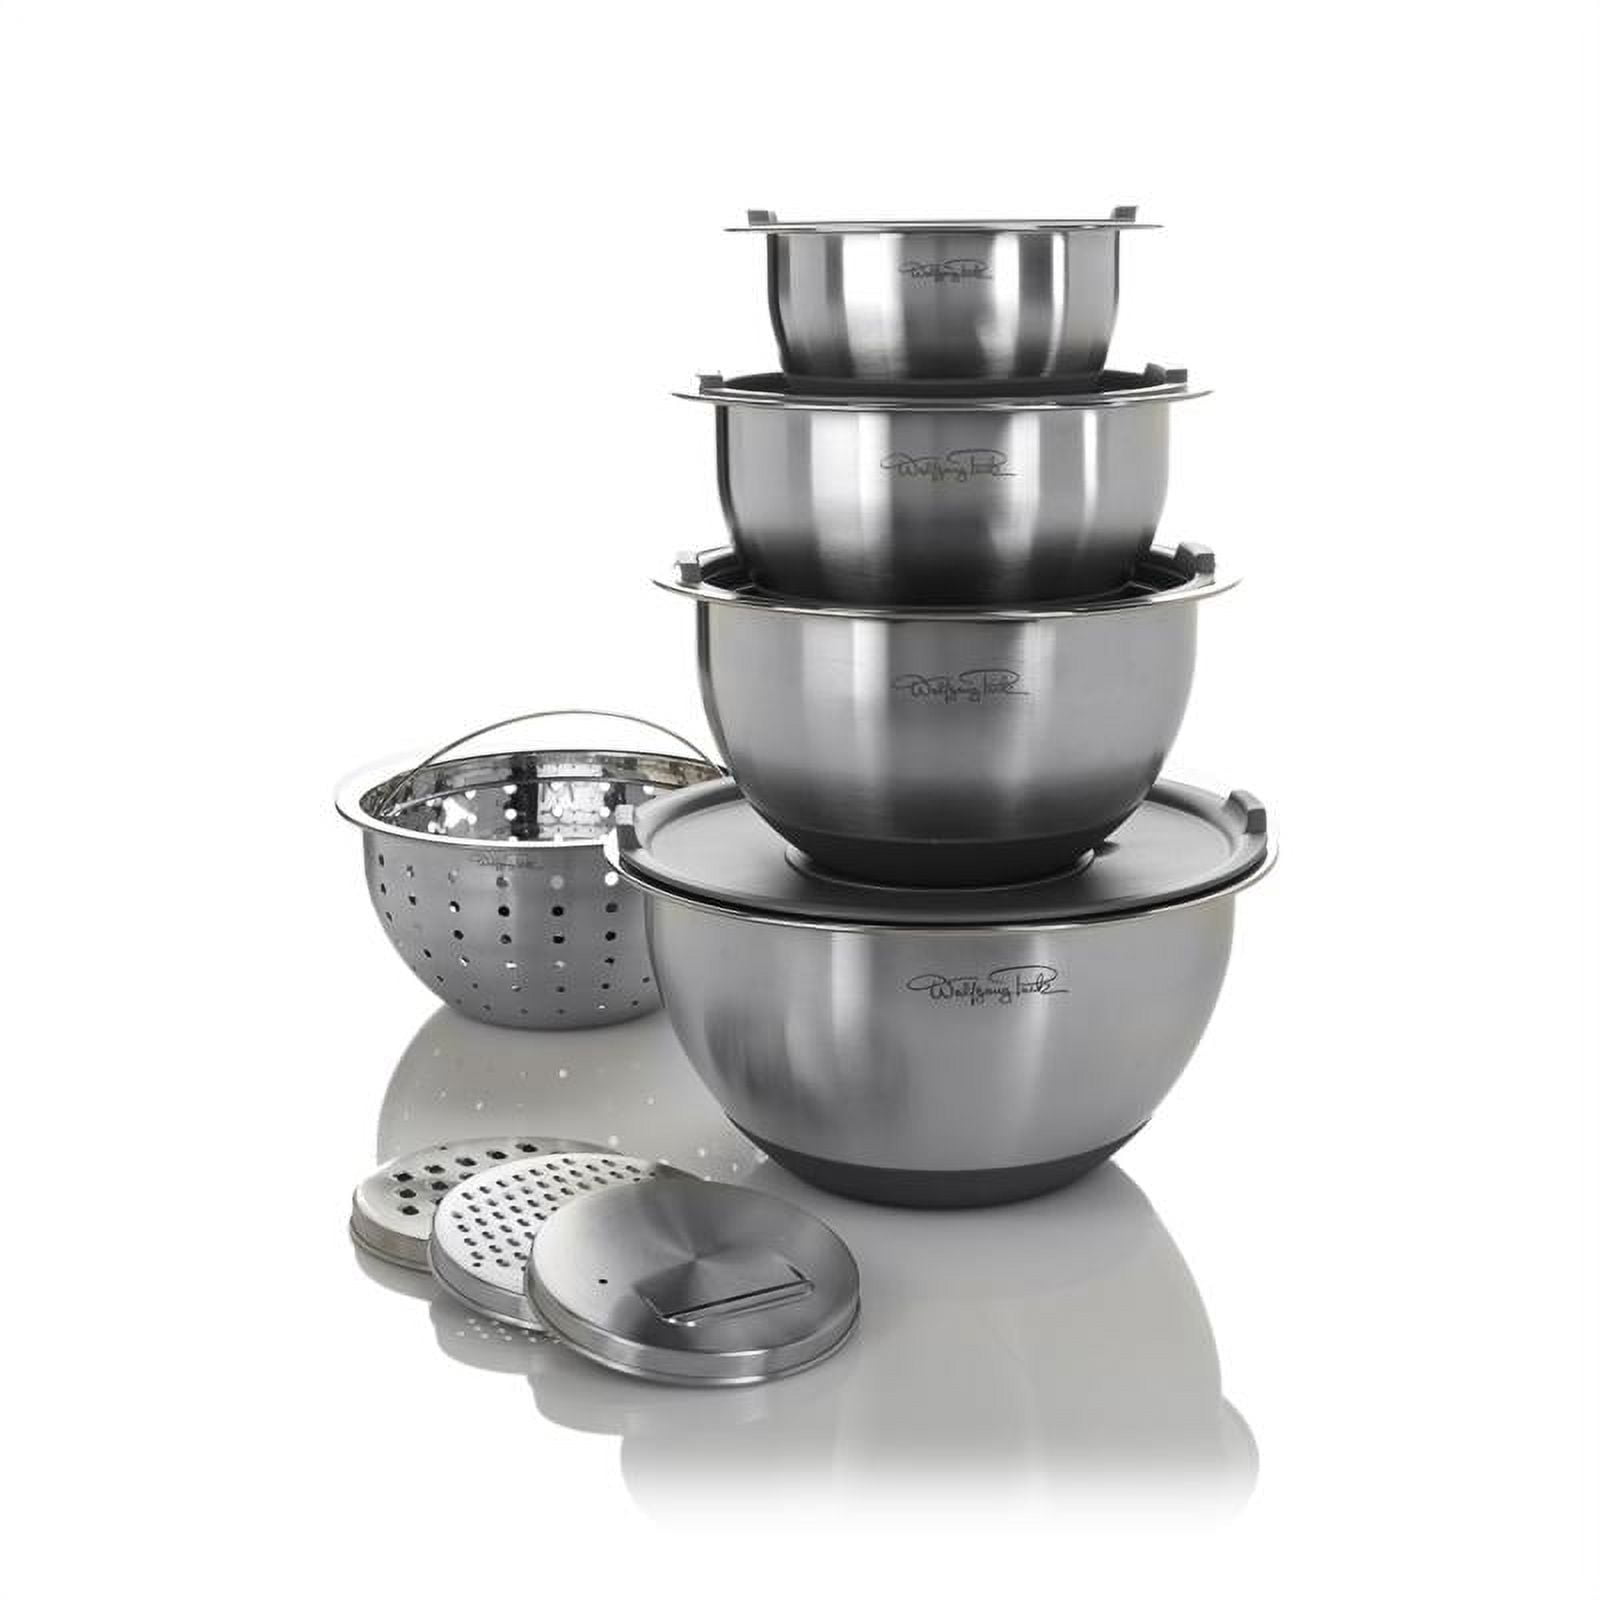 Wolfgang Puck 21-Piece Stainless Steel Cookware and Mixing Bowls